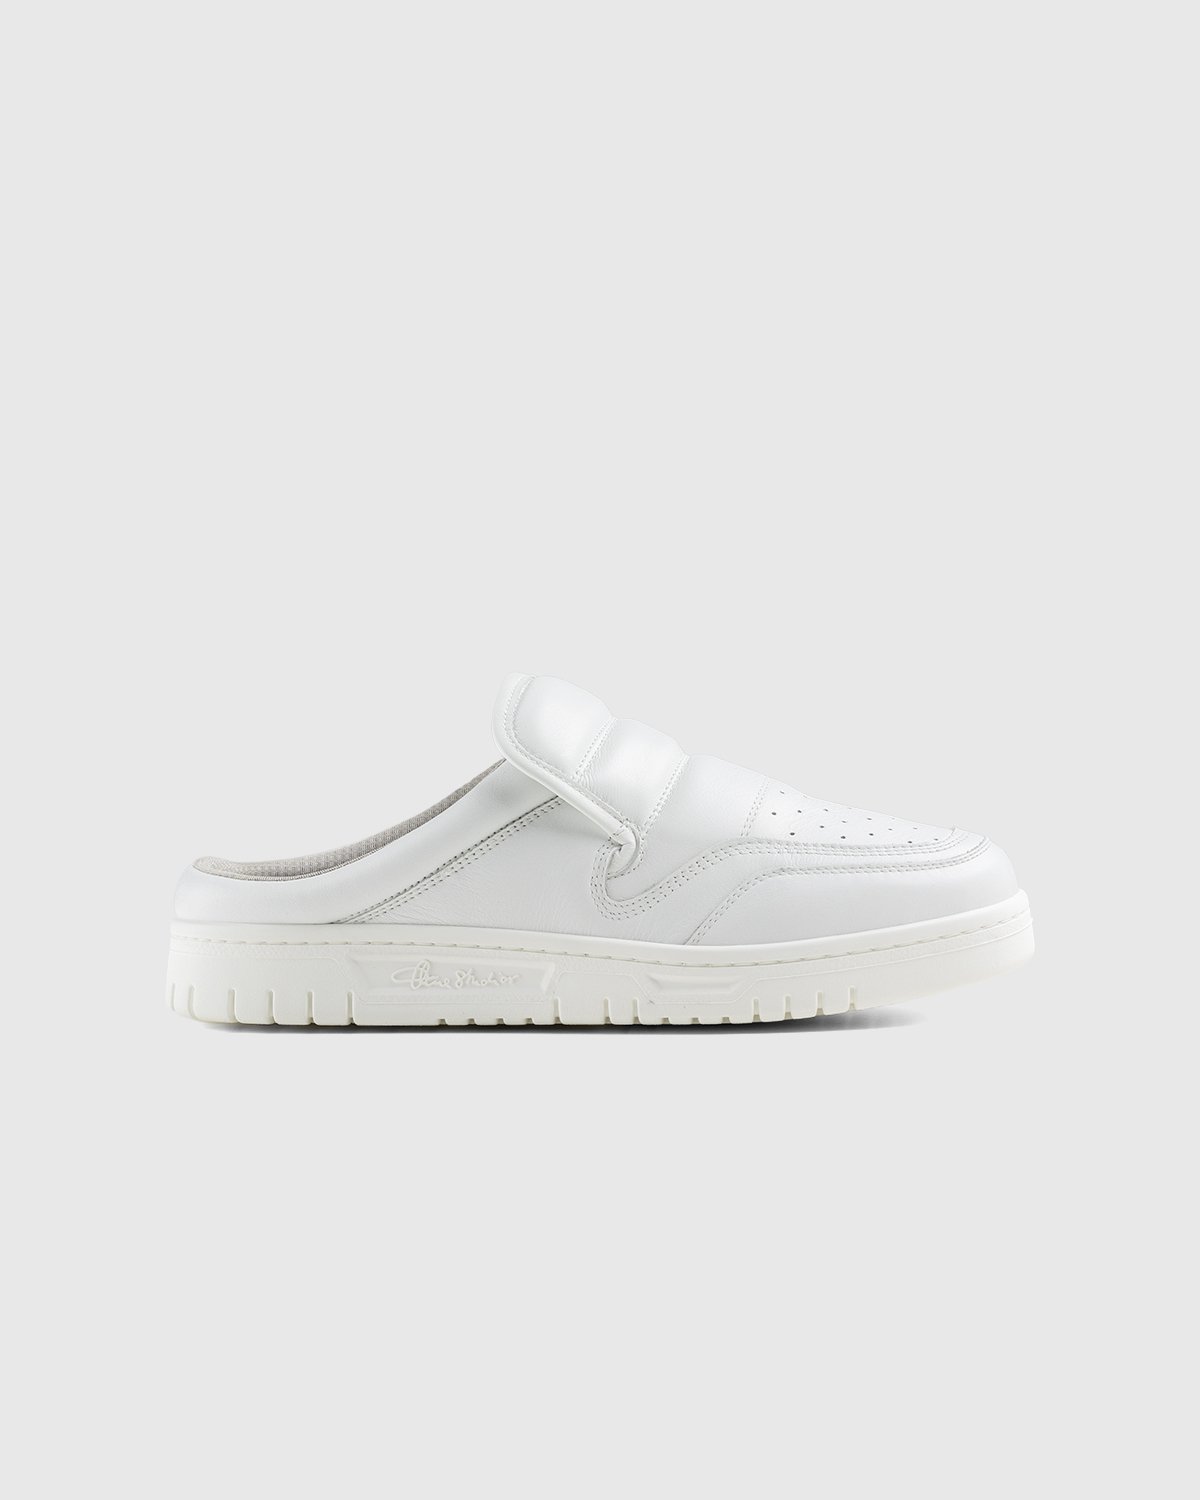 Acne Studios - Cow Leather Mule White - Footwear - White - Image 1